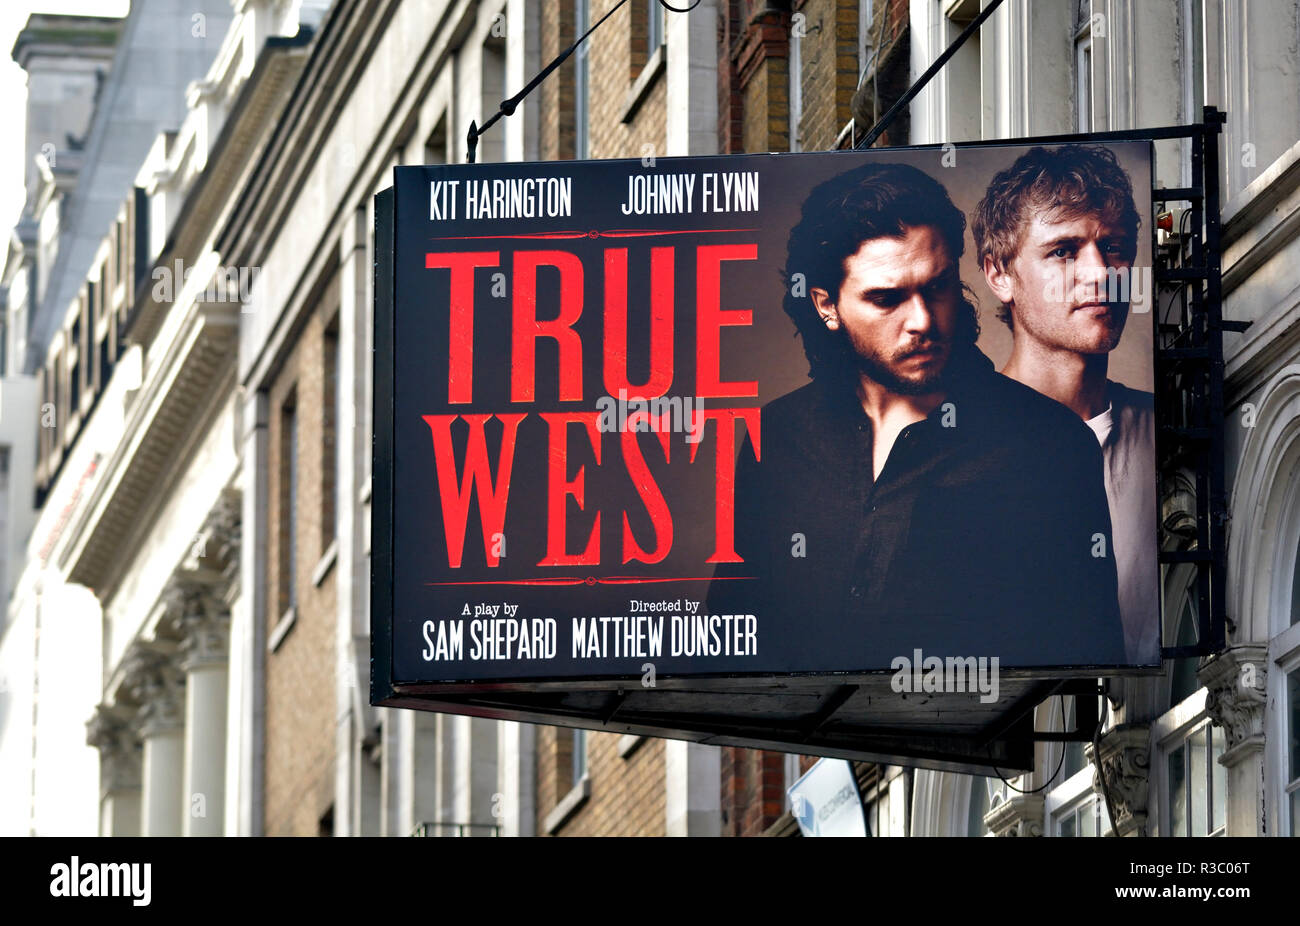 London, England, UK. 'True West' at the Vaudeville Theatre, the Strand.  Play by Sam Shepard, starring Kit Harrington and Johnny Flynn, starting  23rd N Stock Photo - Alamy